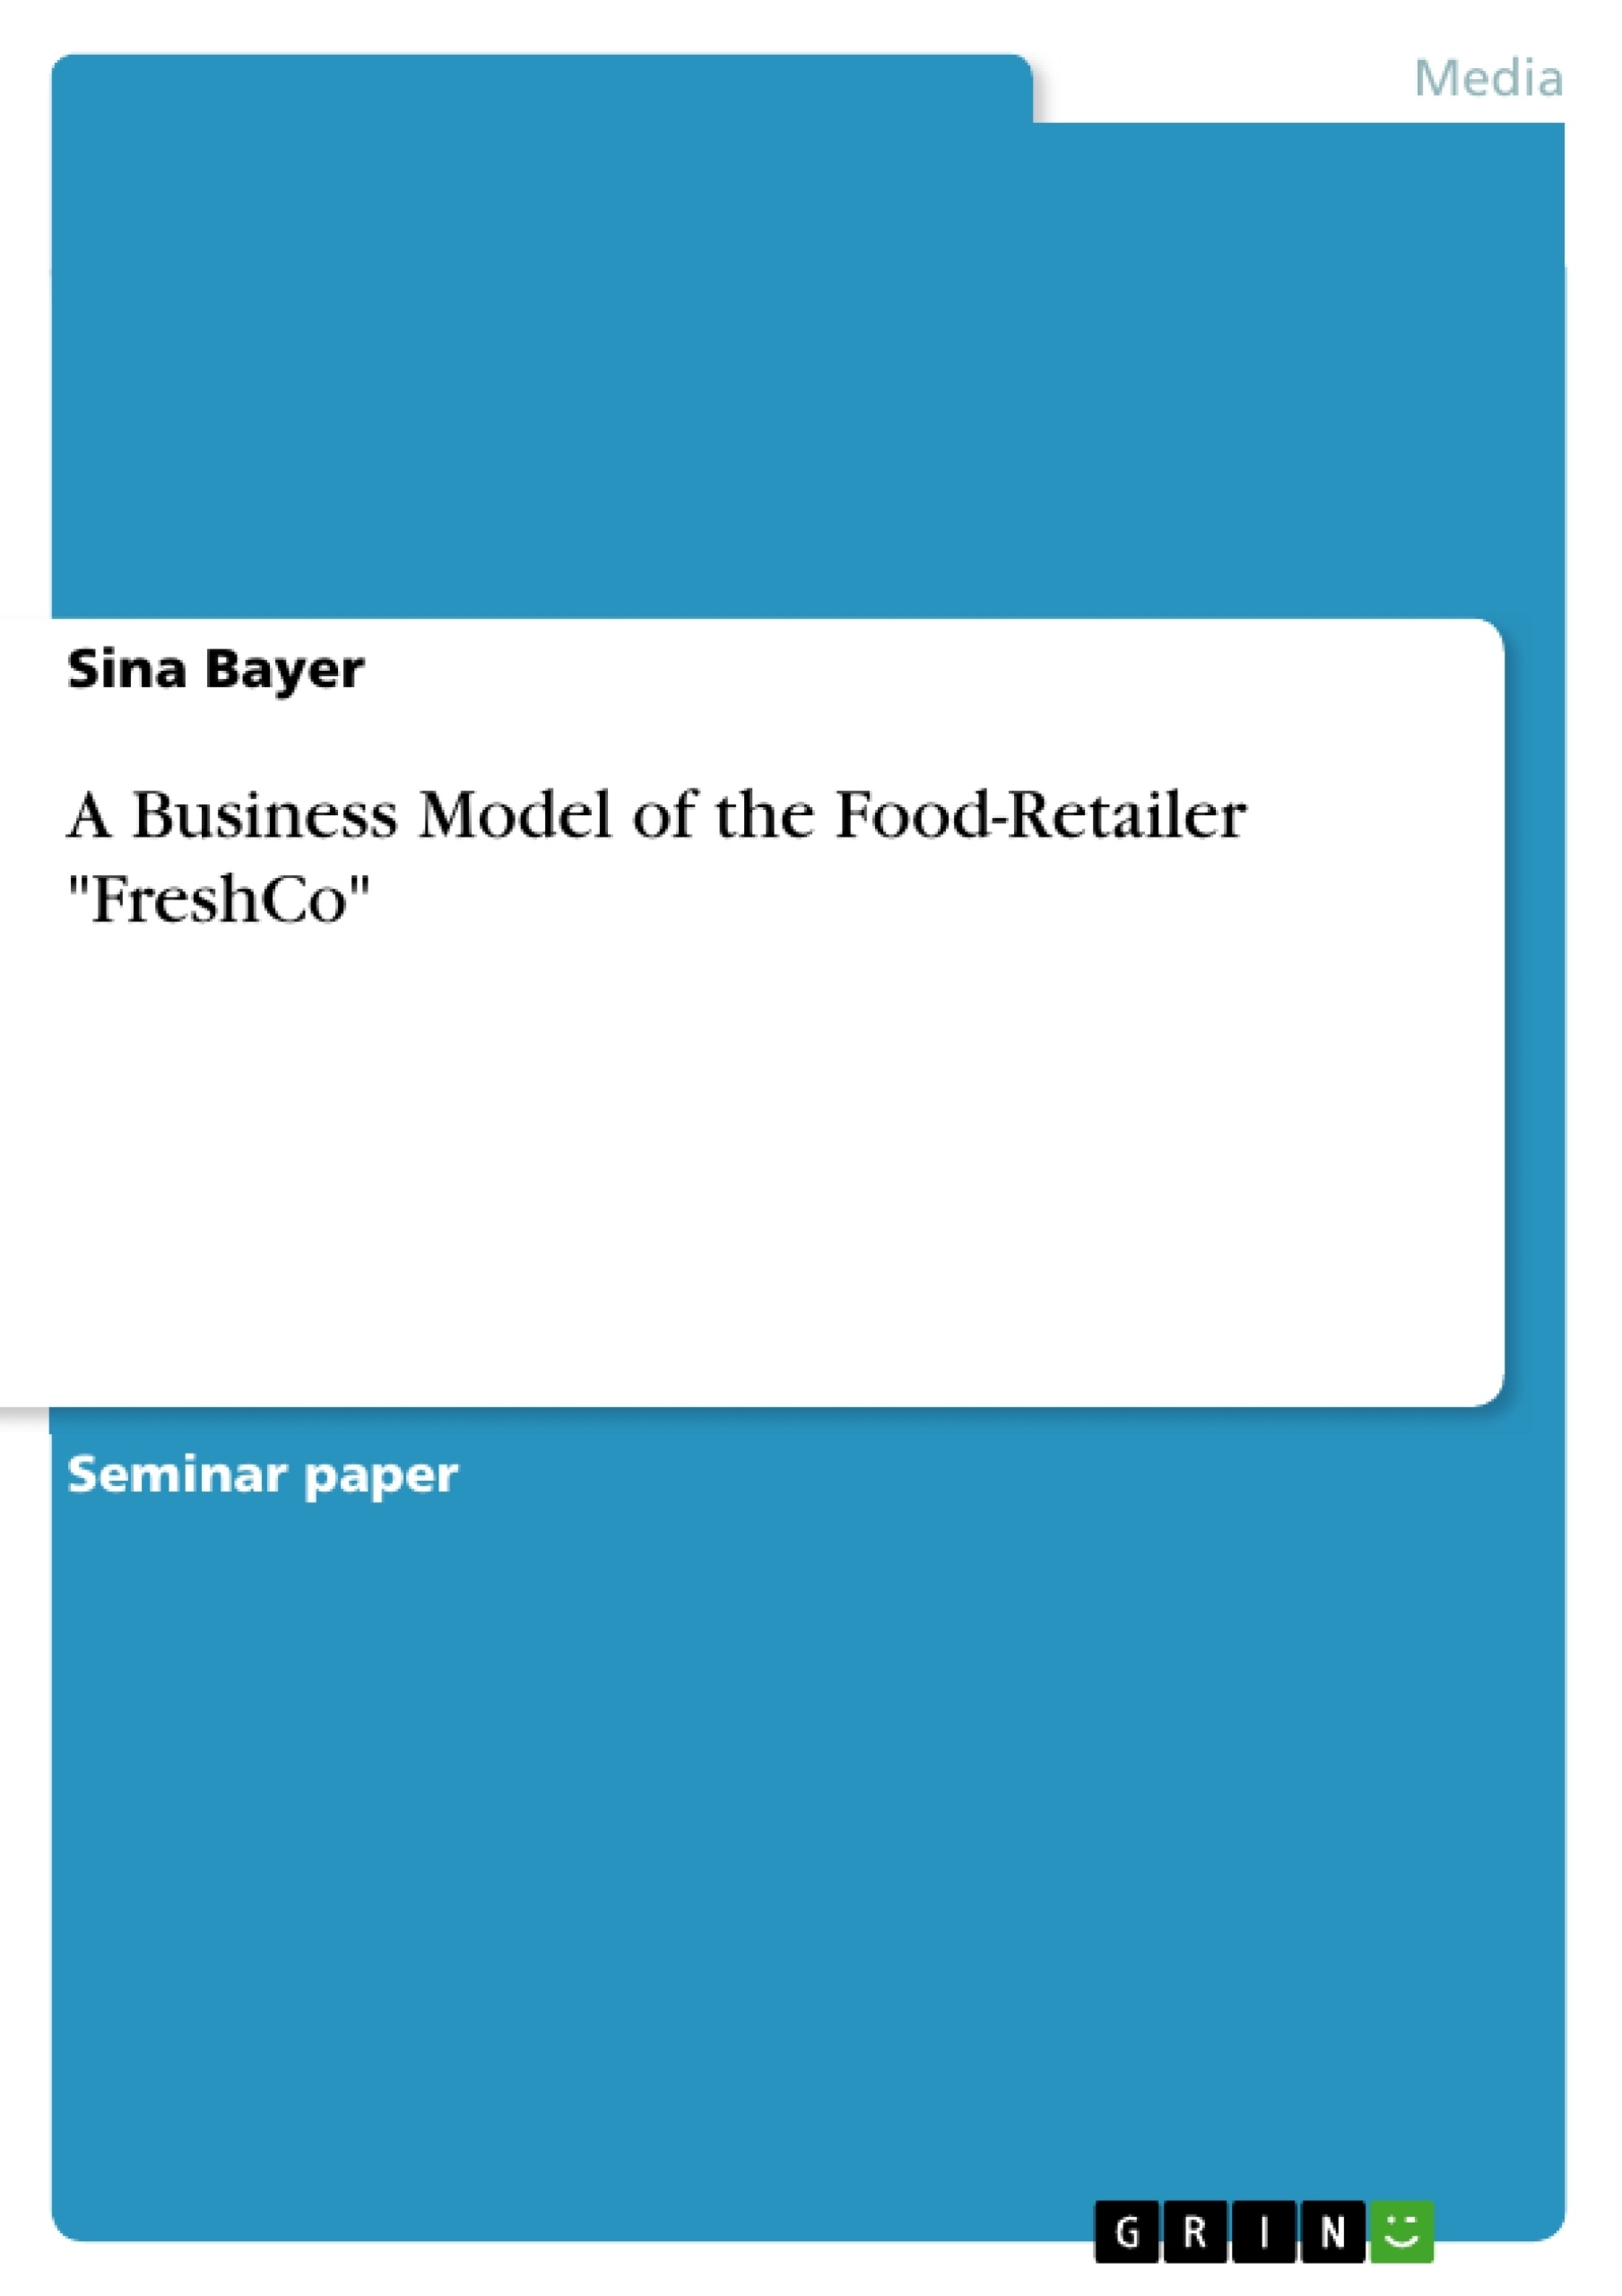 Title: A Business Model of the Food-Retailer "FreshCo"